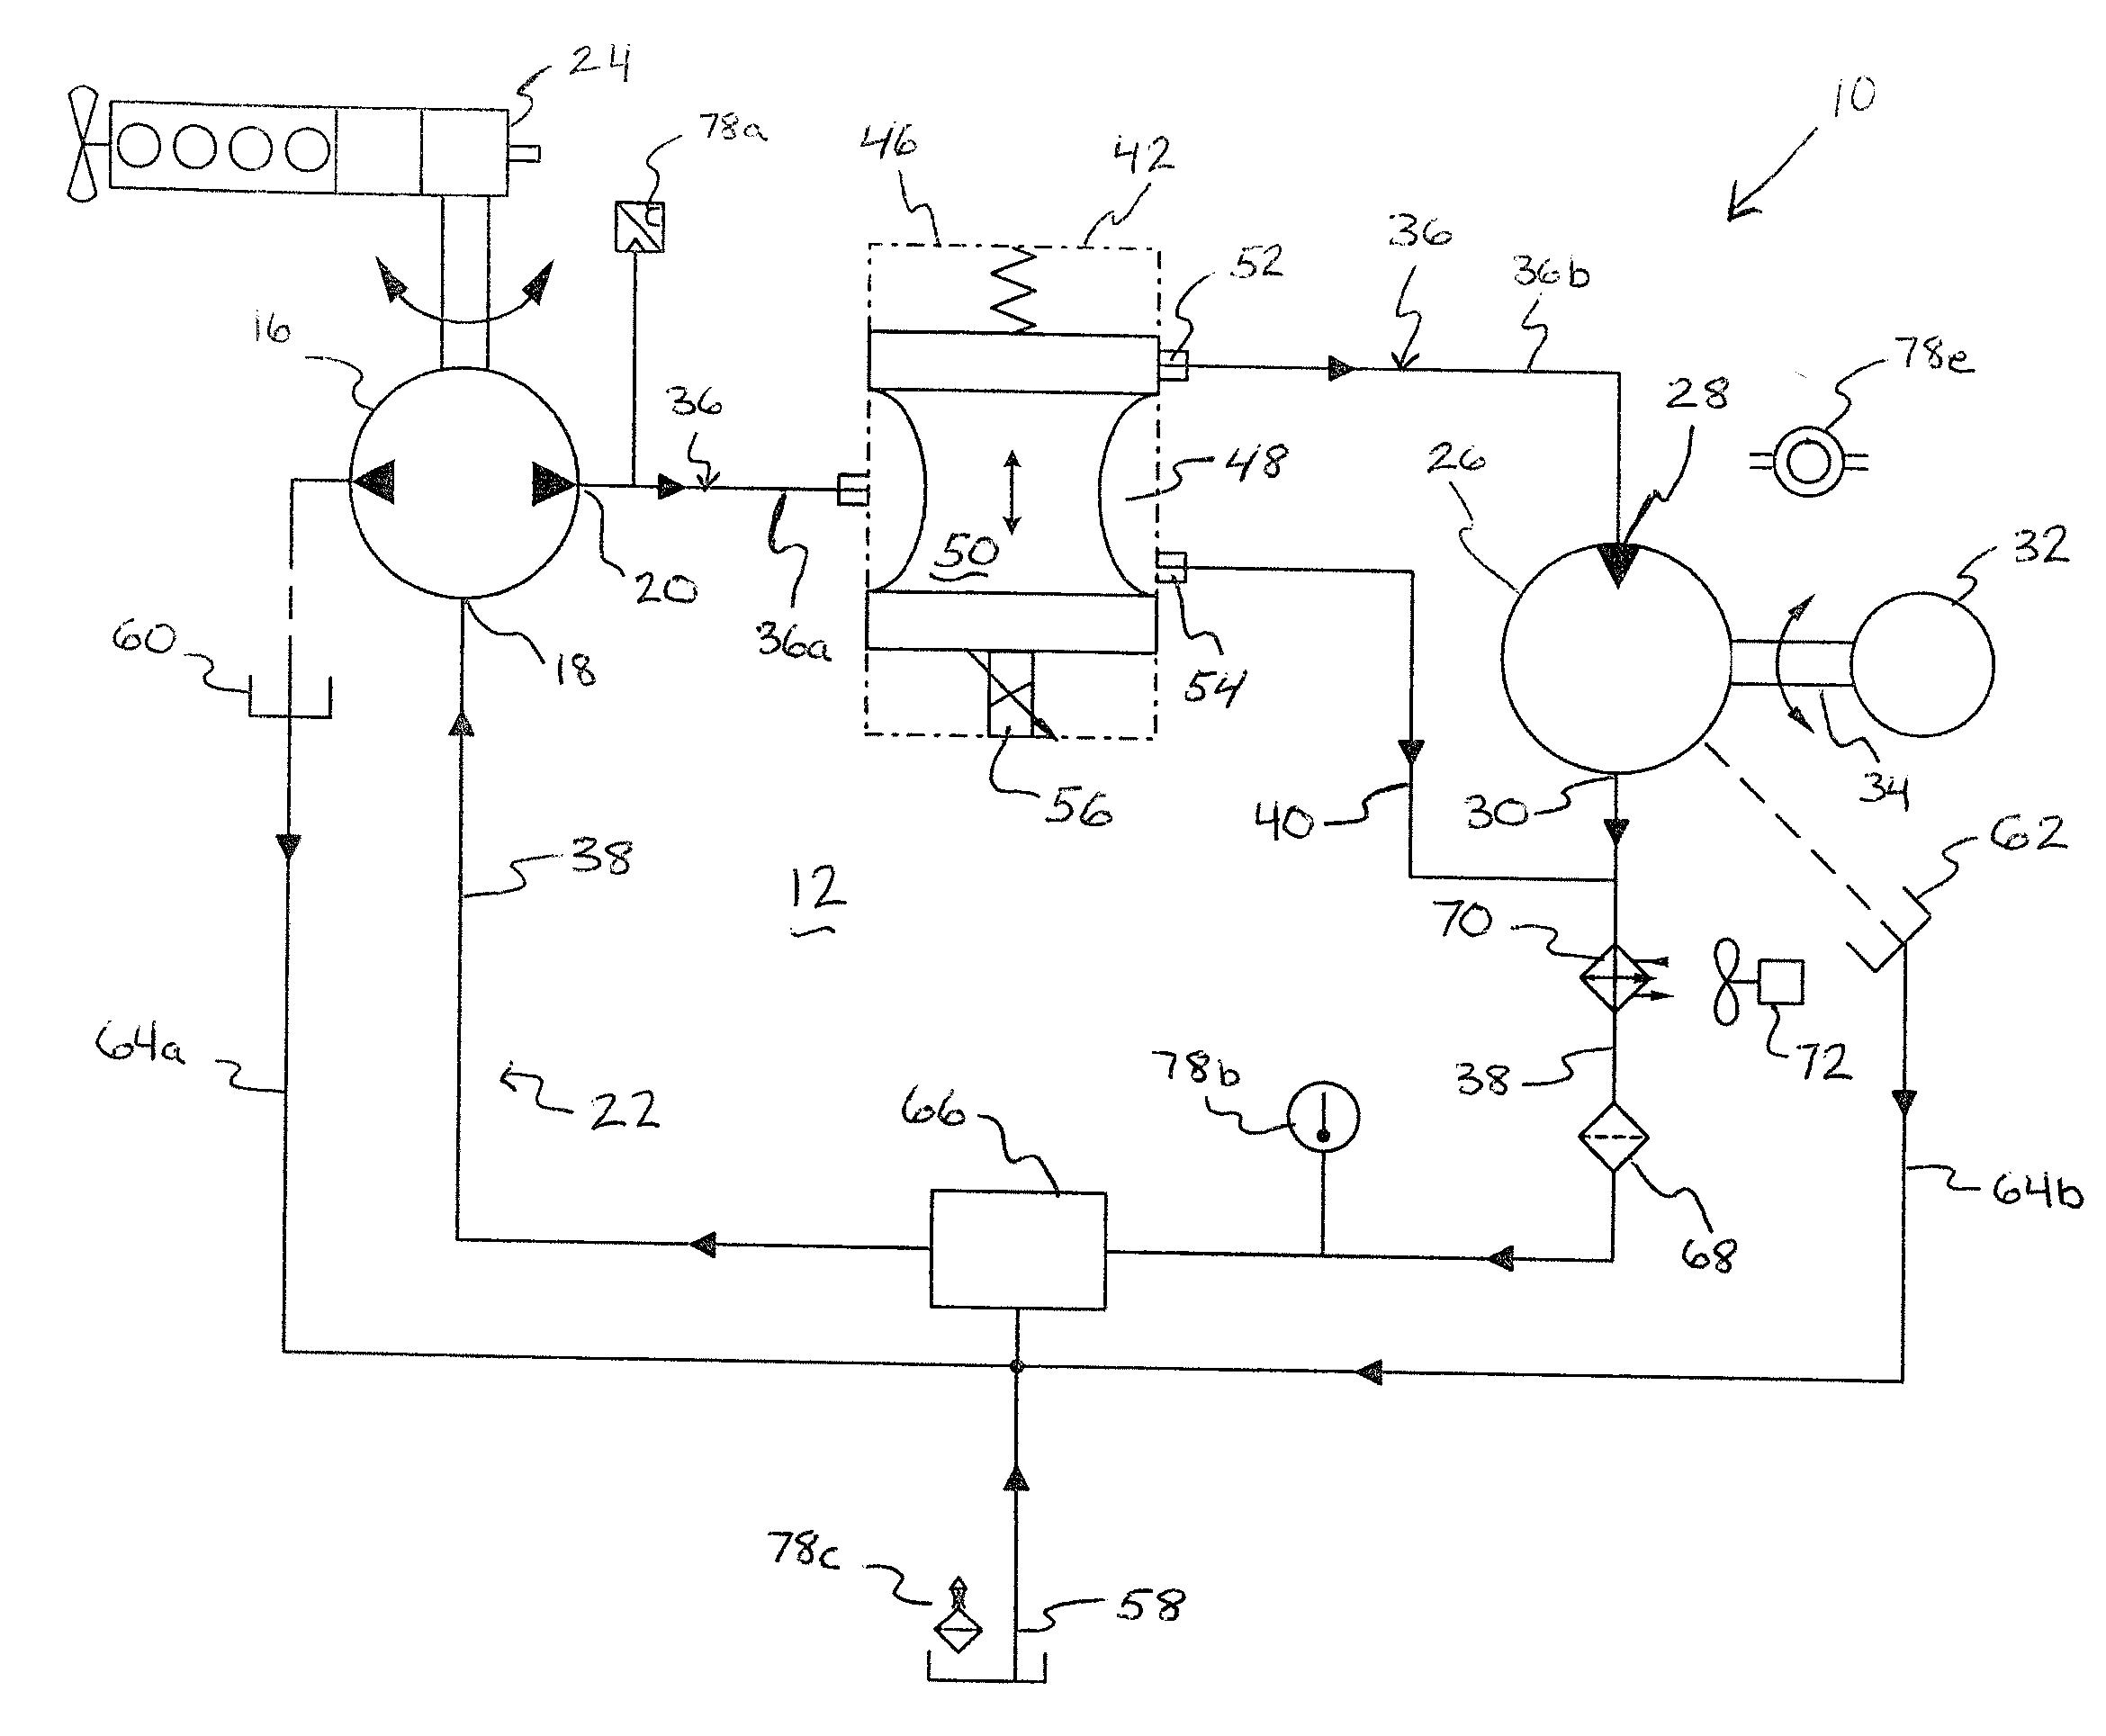 Electronic Control for a Hydraulically Driven Generator